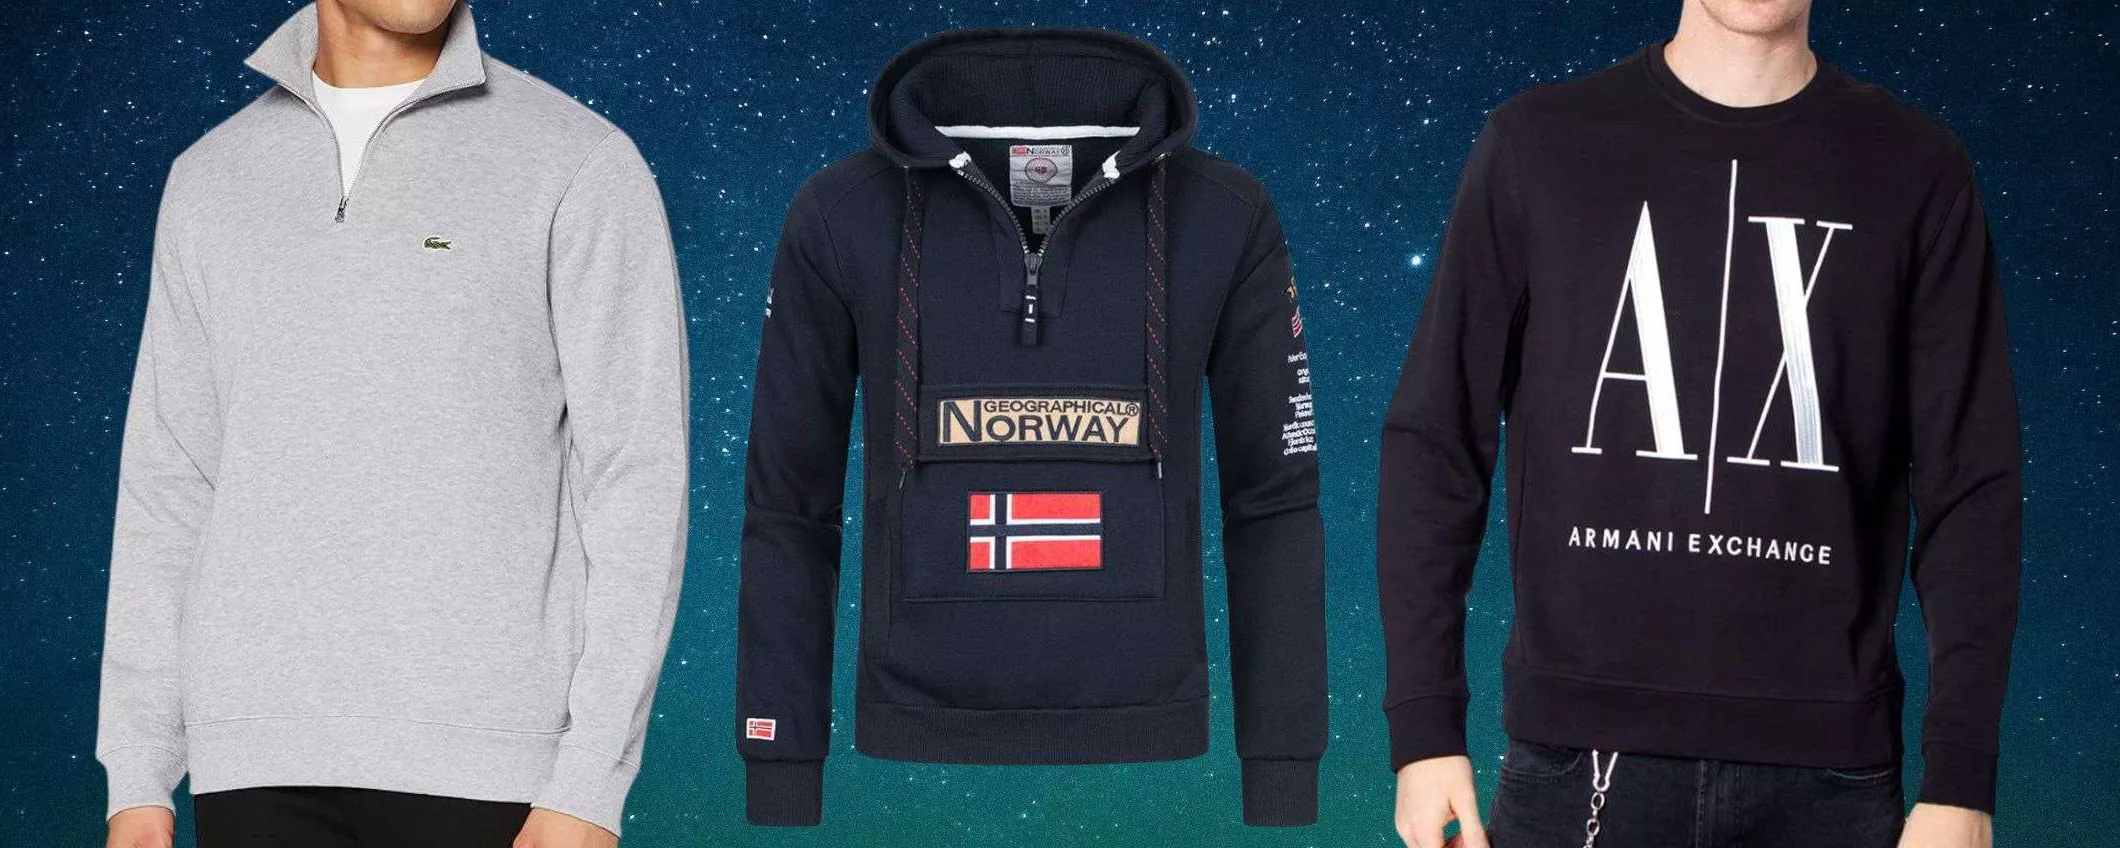 Sweatshirts from €20 on Amazon: big brands in absolute EMPTY this weekend